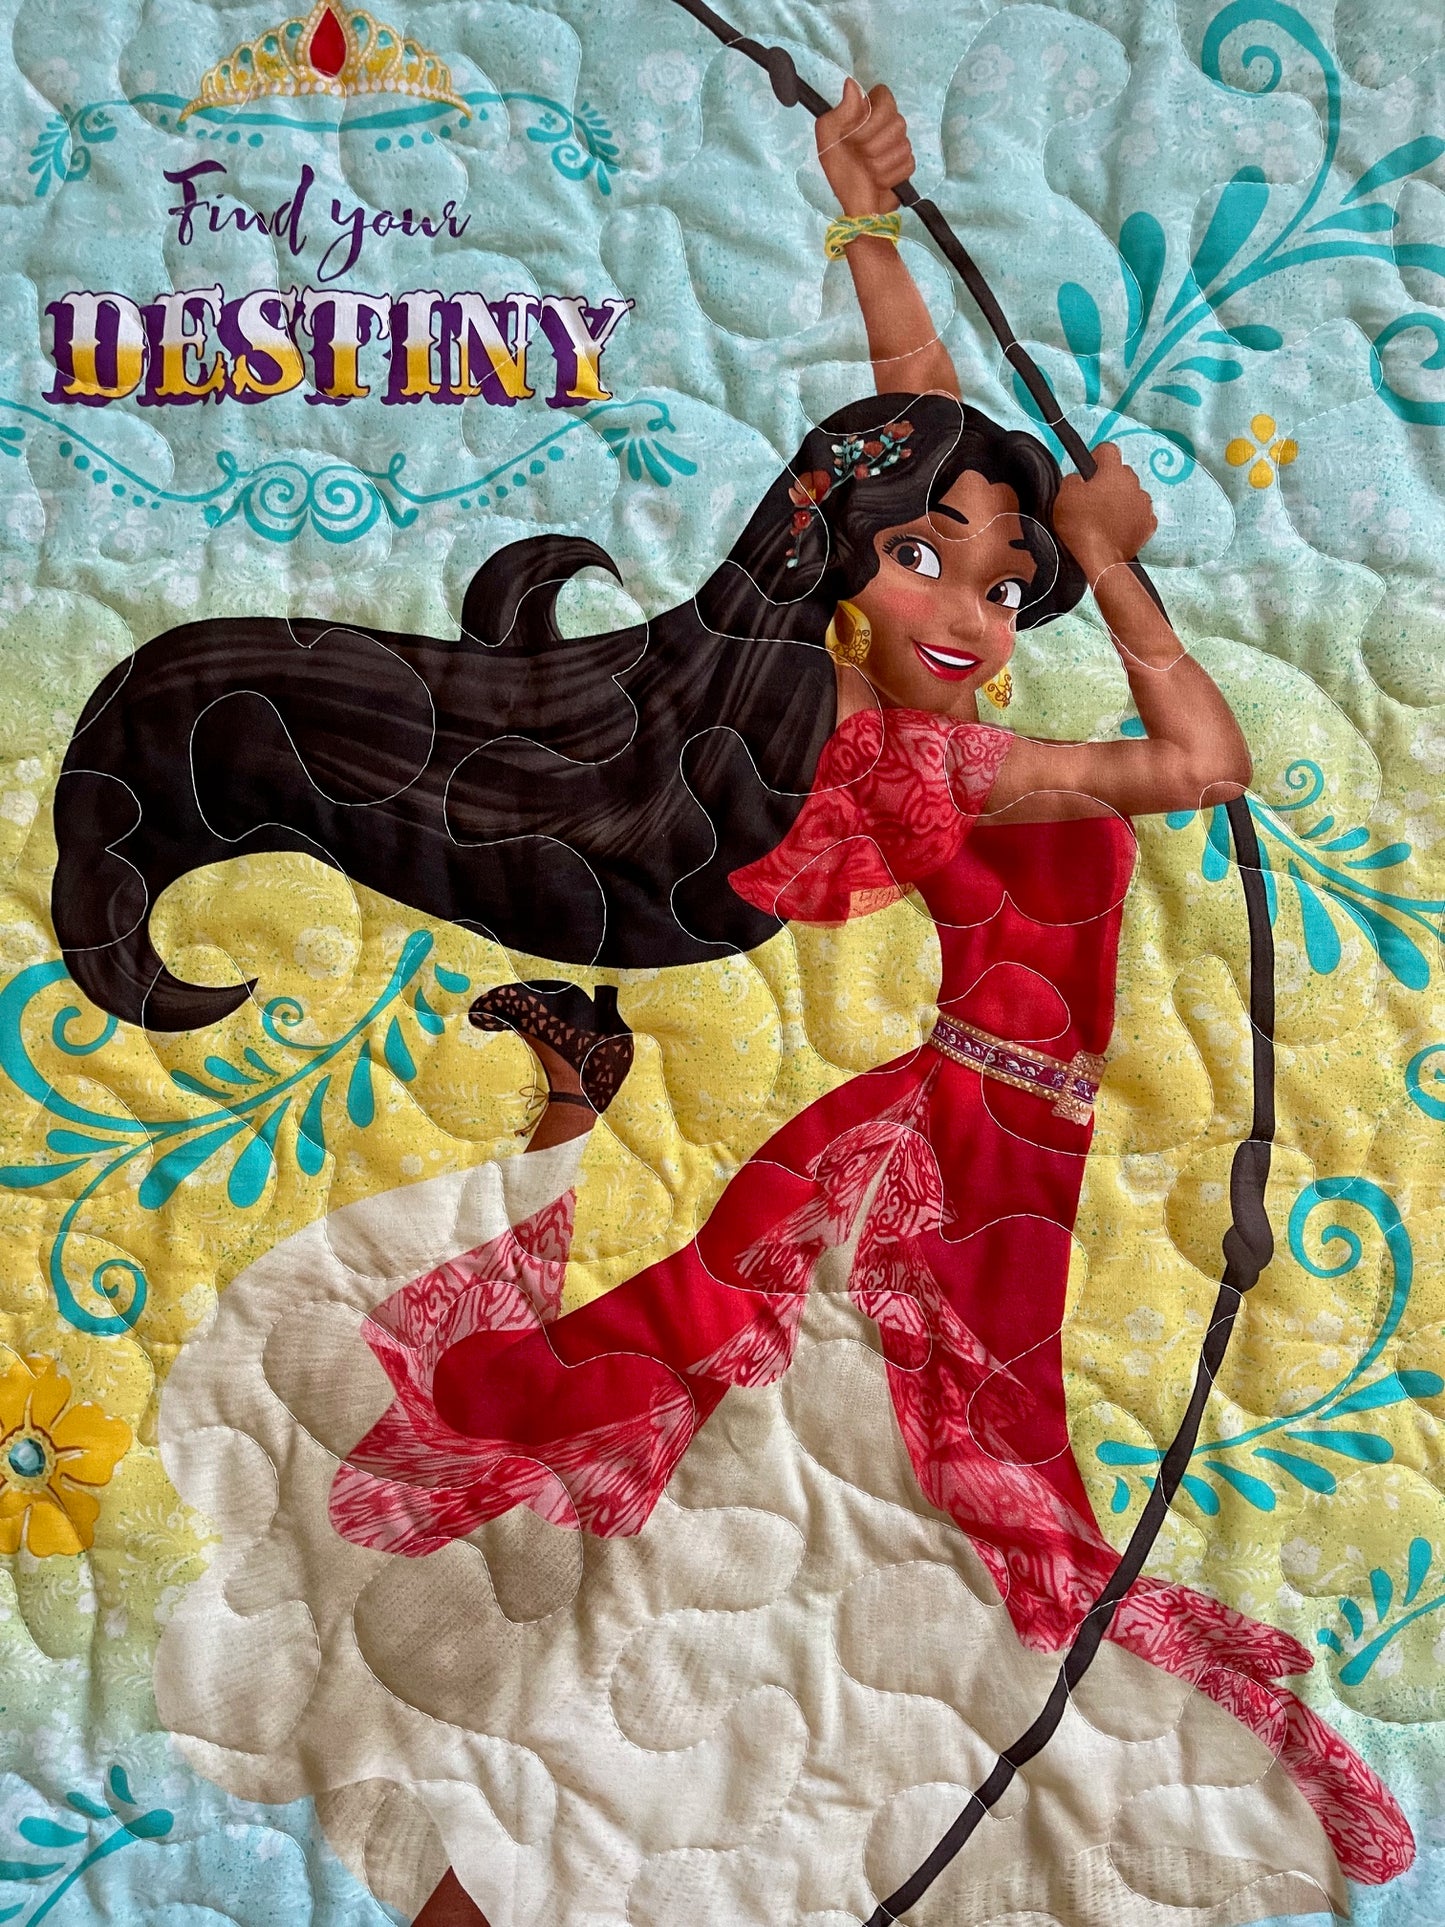 DISNEY PRINCESS ELENA OF AVALOR Inspired FIND YOUR DESTINY 36"x44" QUILTED BLANKET